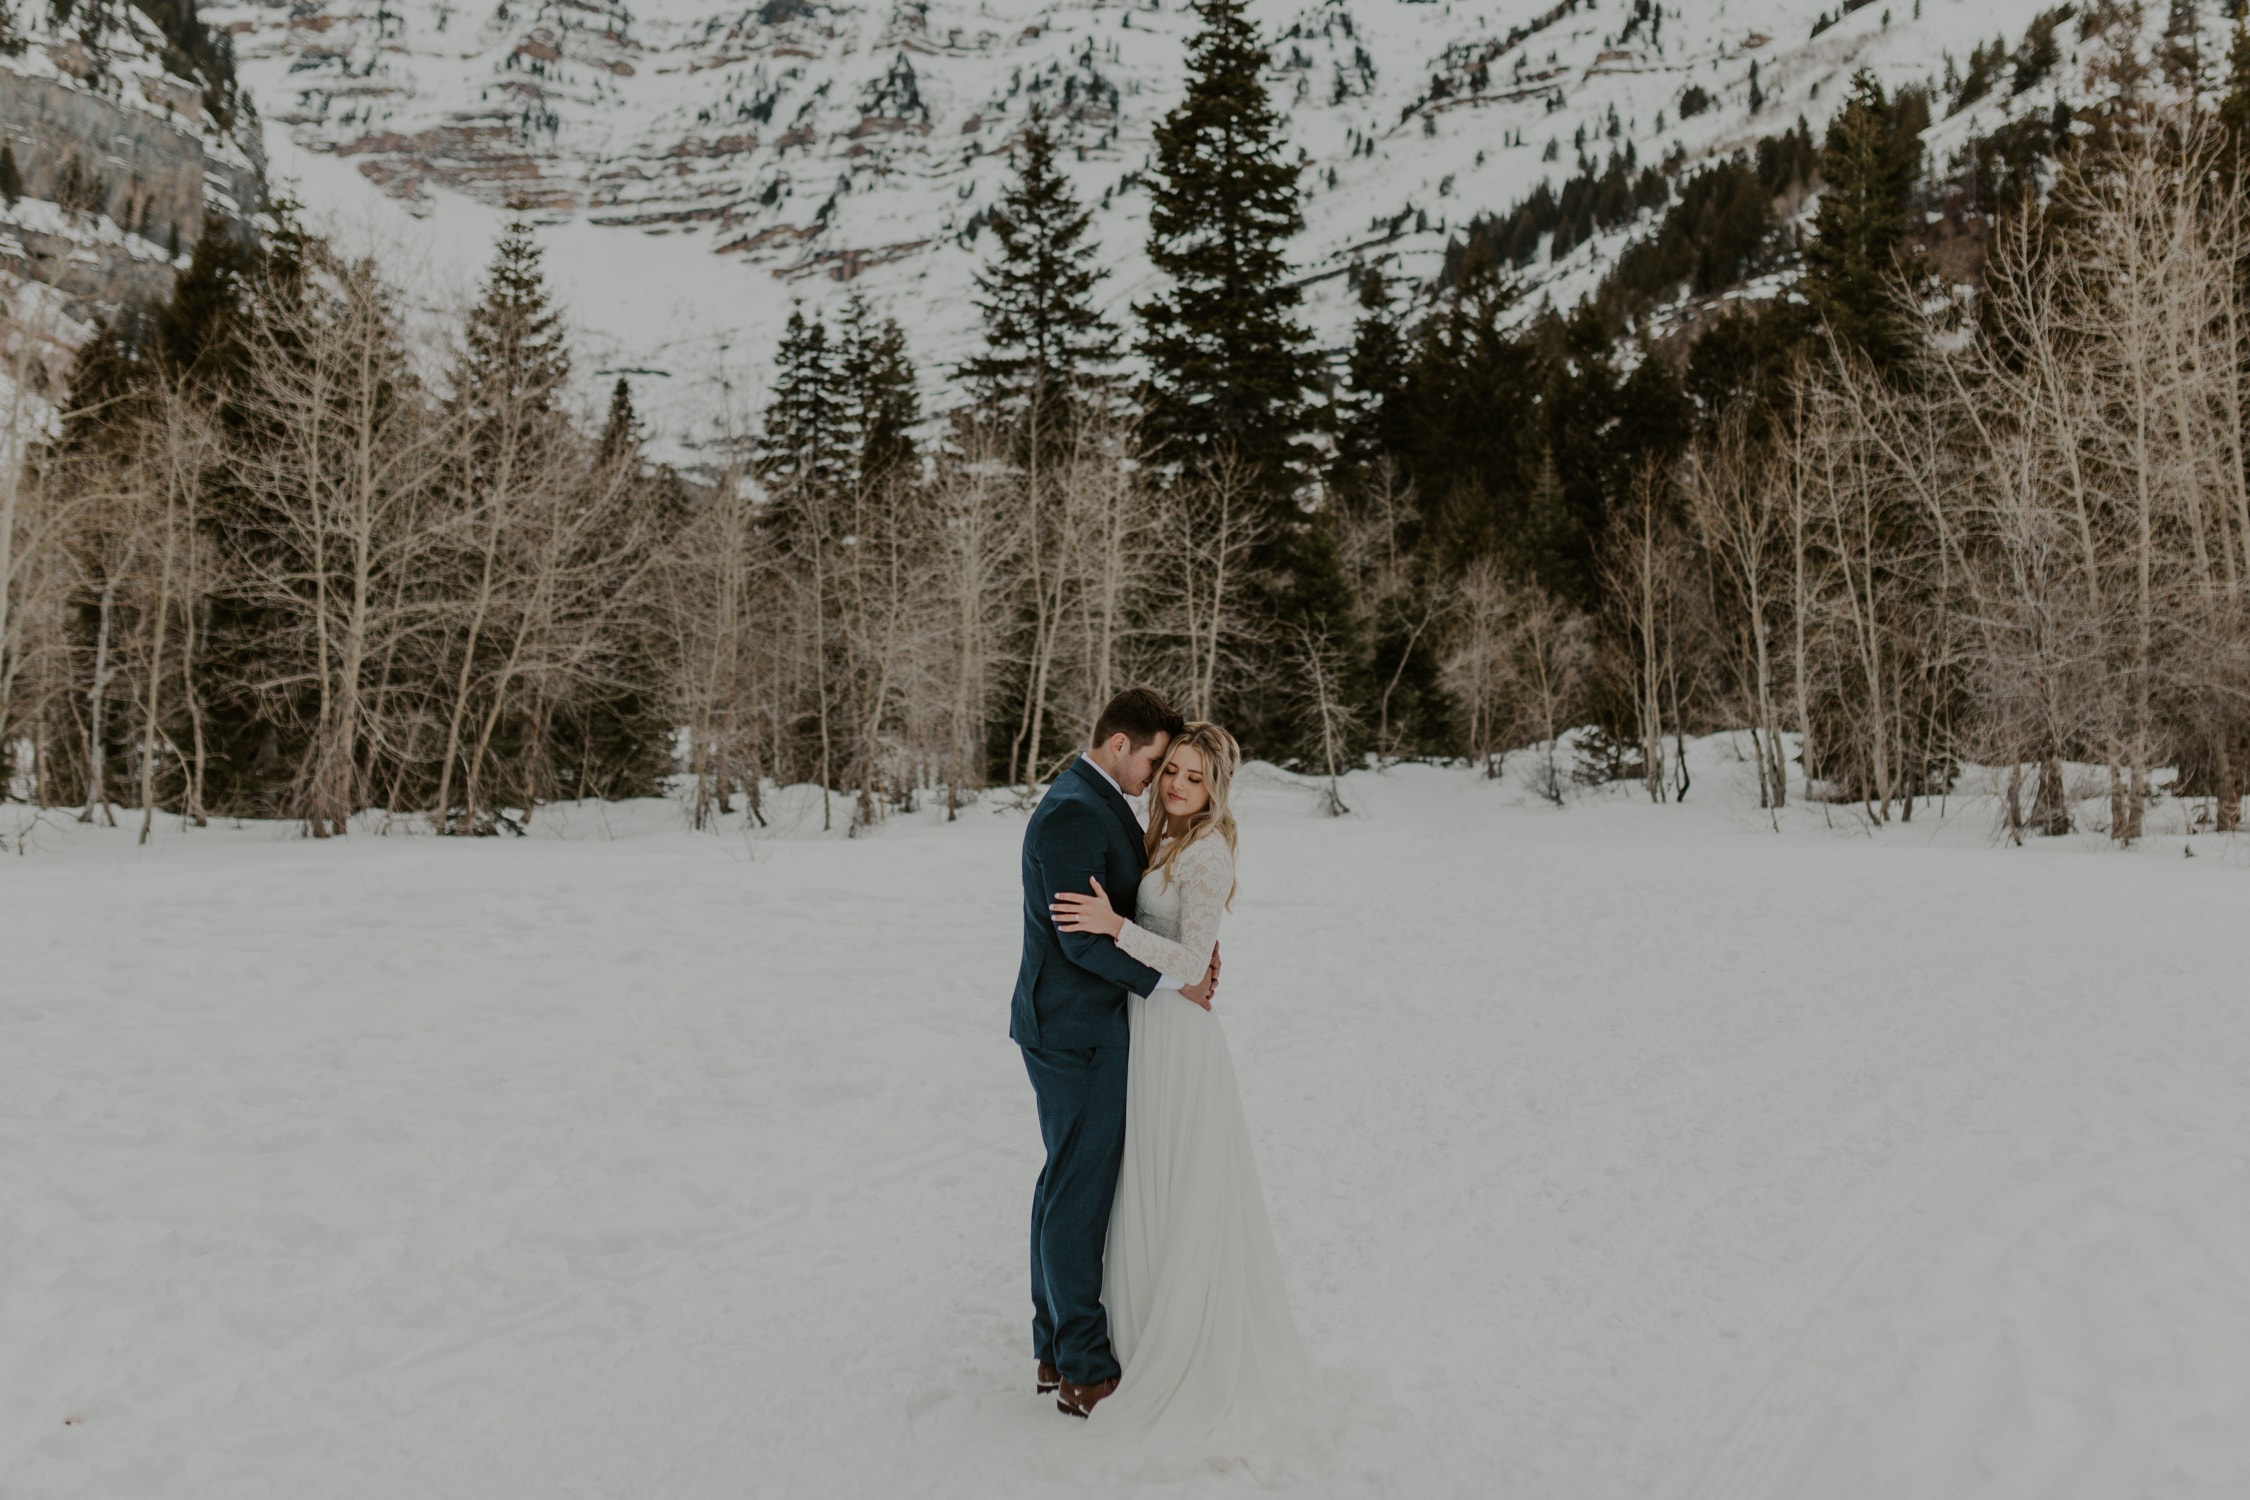 A bride and groom hugging each other during their winter elopement.